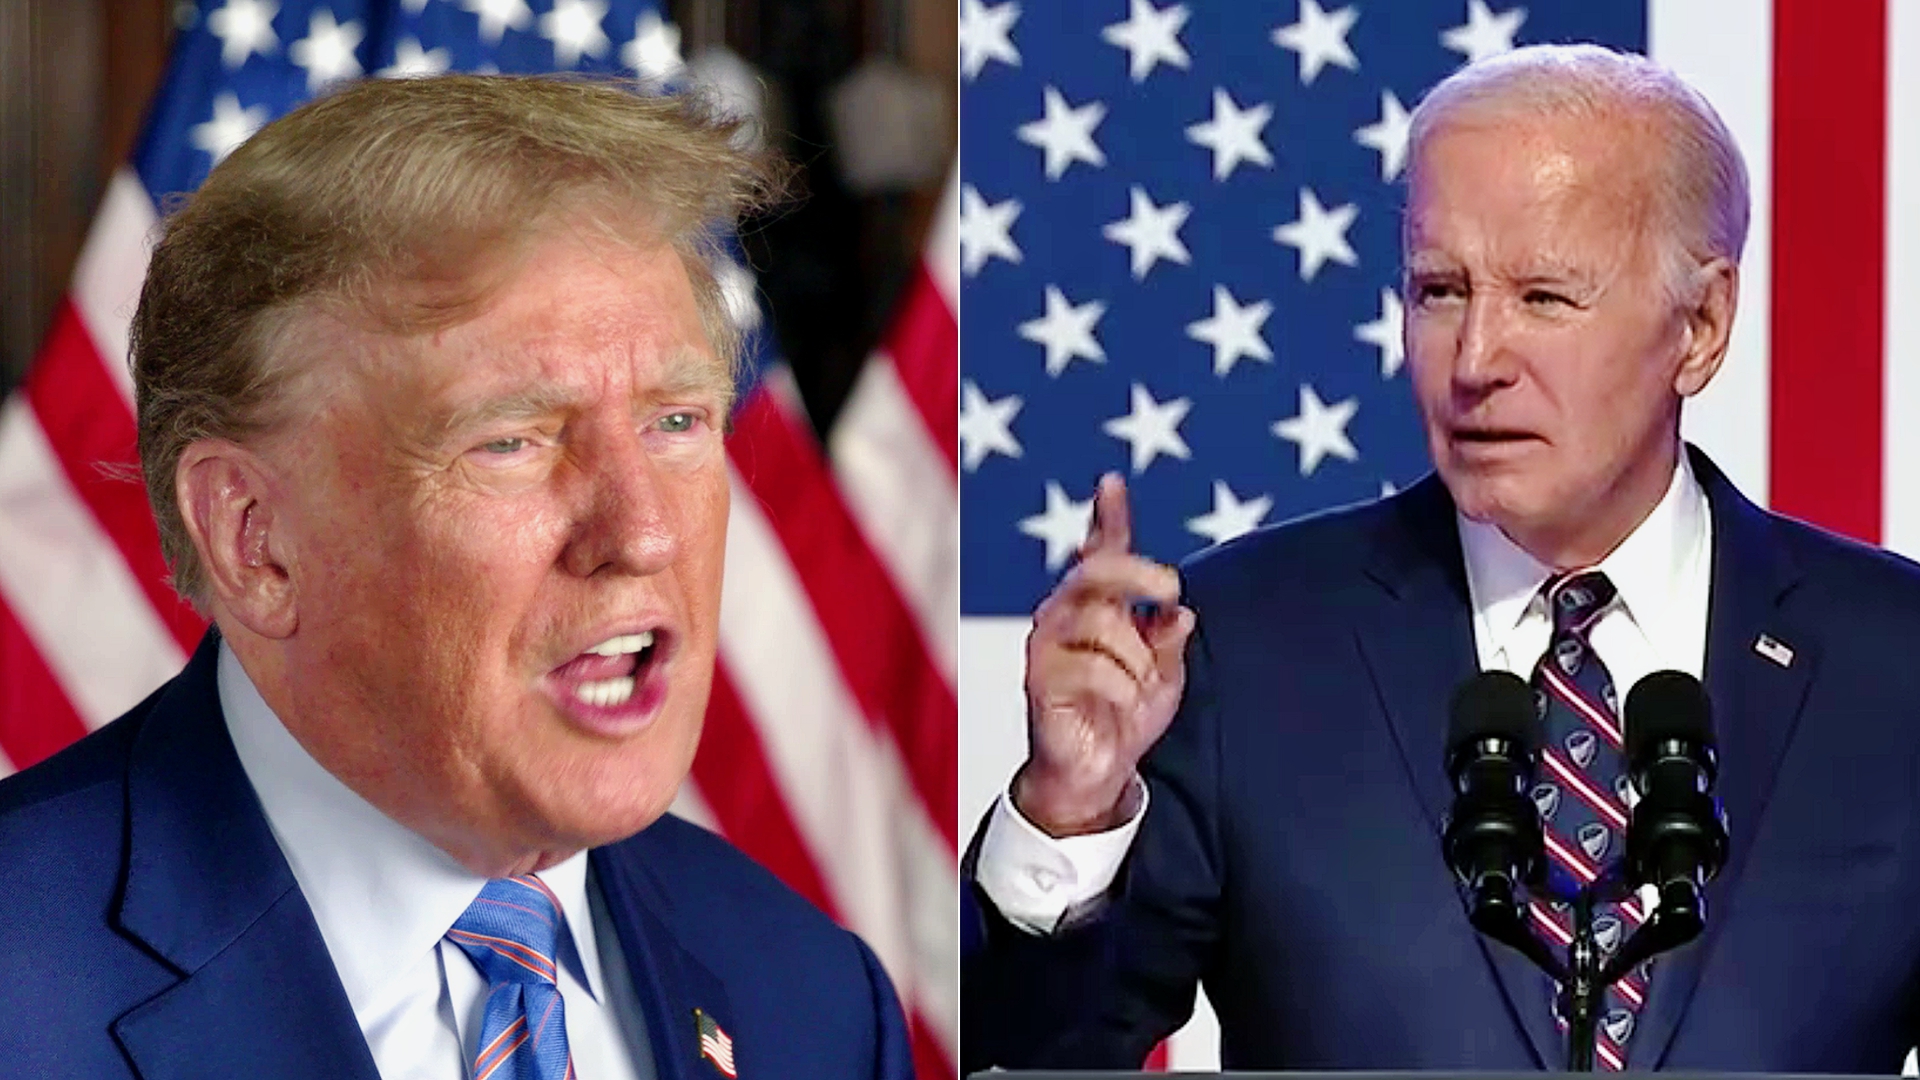 Trump Rants Into The Dead of Night About Criminal Immunity Appeal — Claims Biden in Danger If He Loses (mediaite.com)